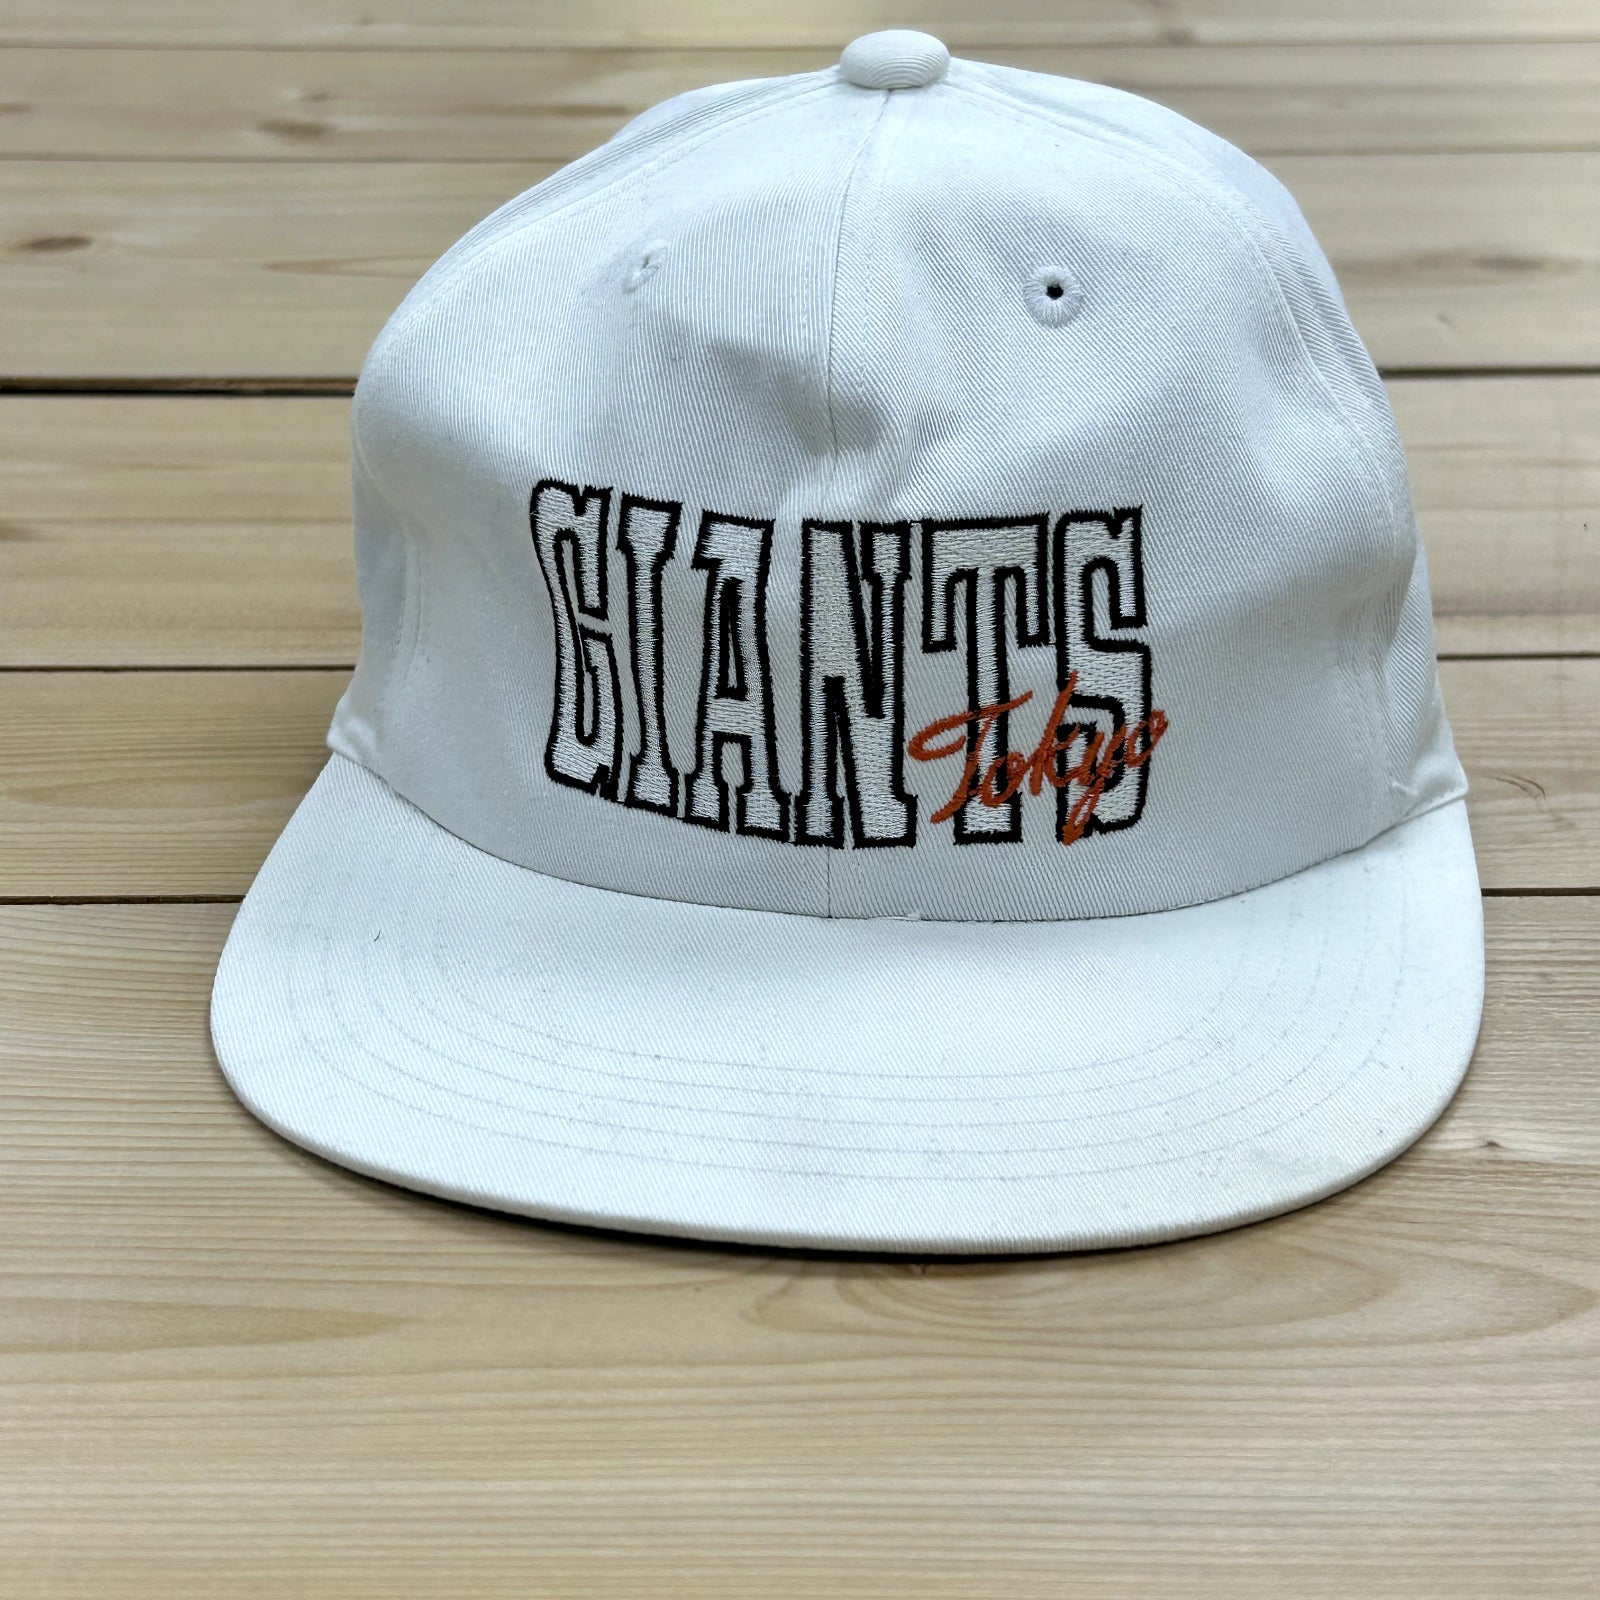 RARE Cross Company White Tokyo Giants Baseball Hat Snap-Back One Size Fits Most